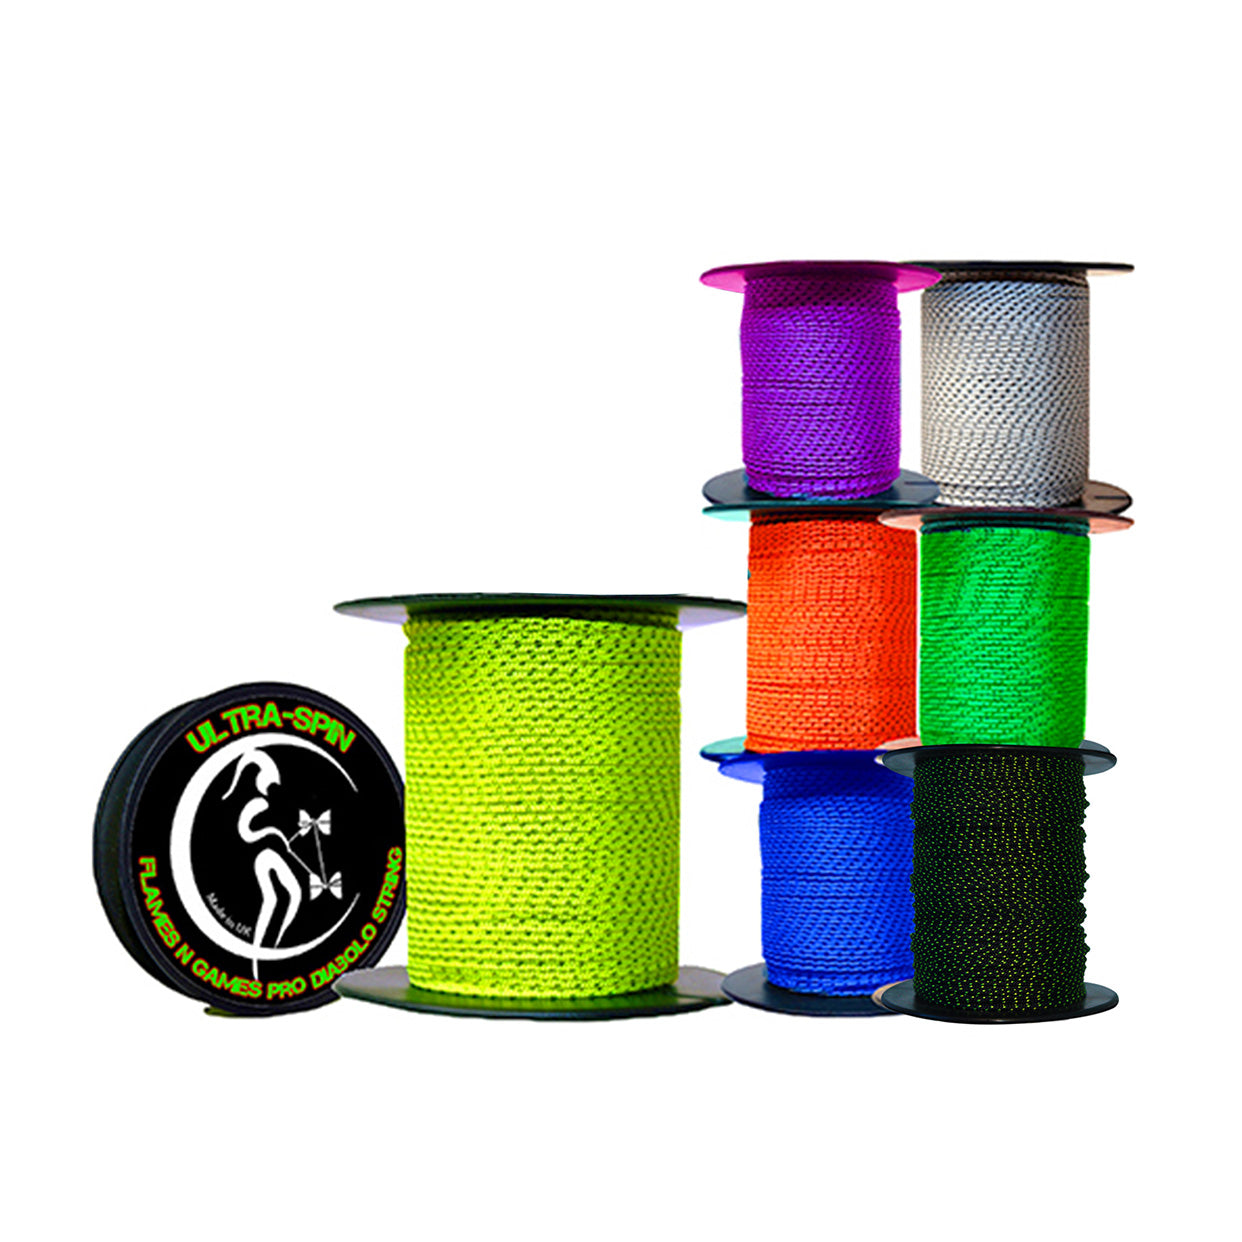 Flames N' Games ULTRA-SPIN Pro Diabolo String 25meter Reels various colours